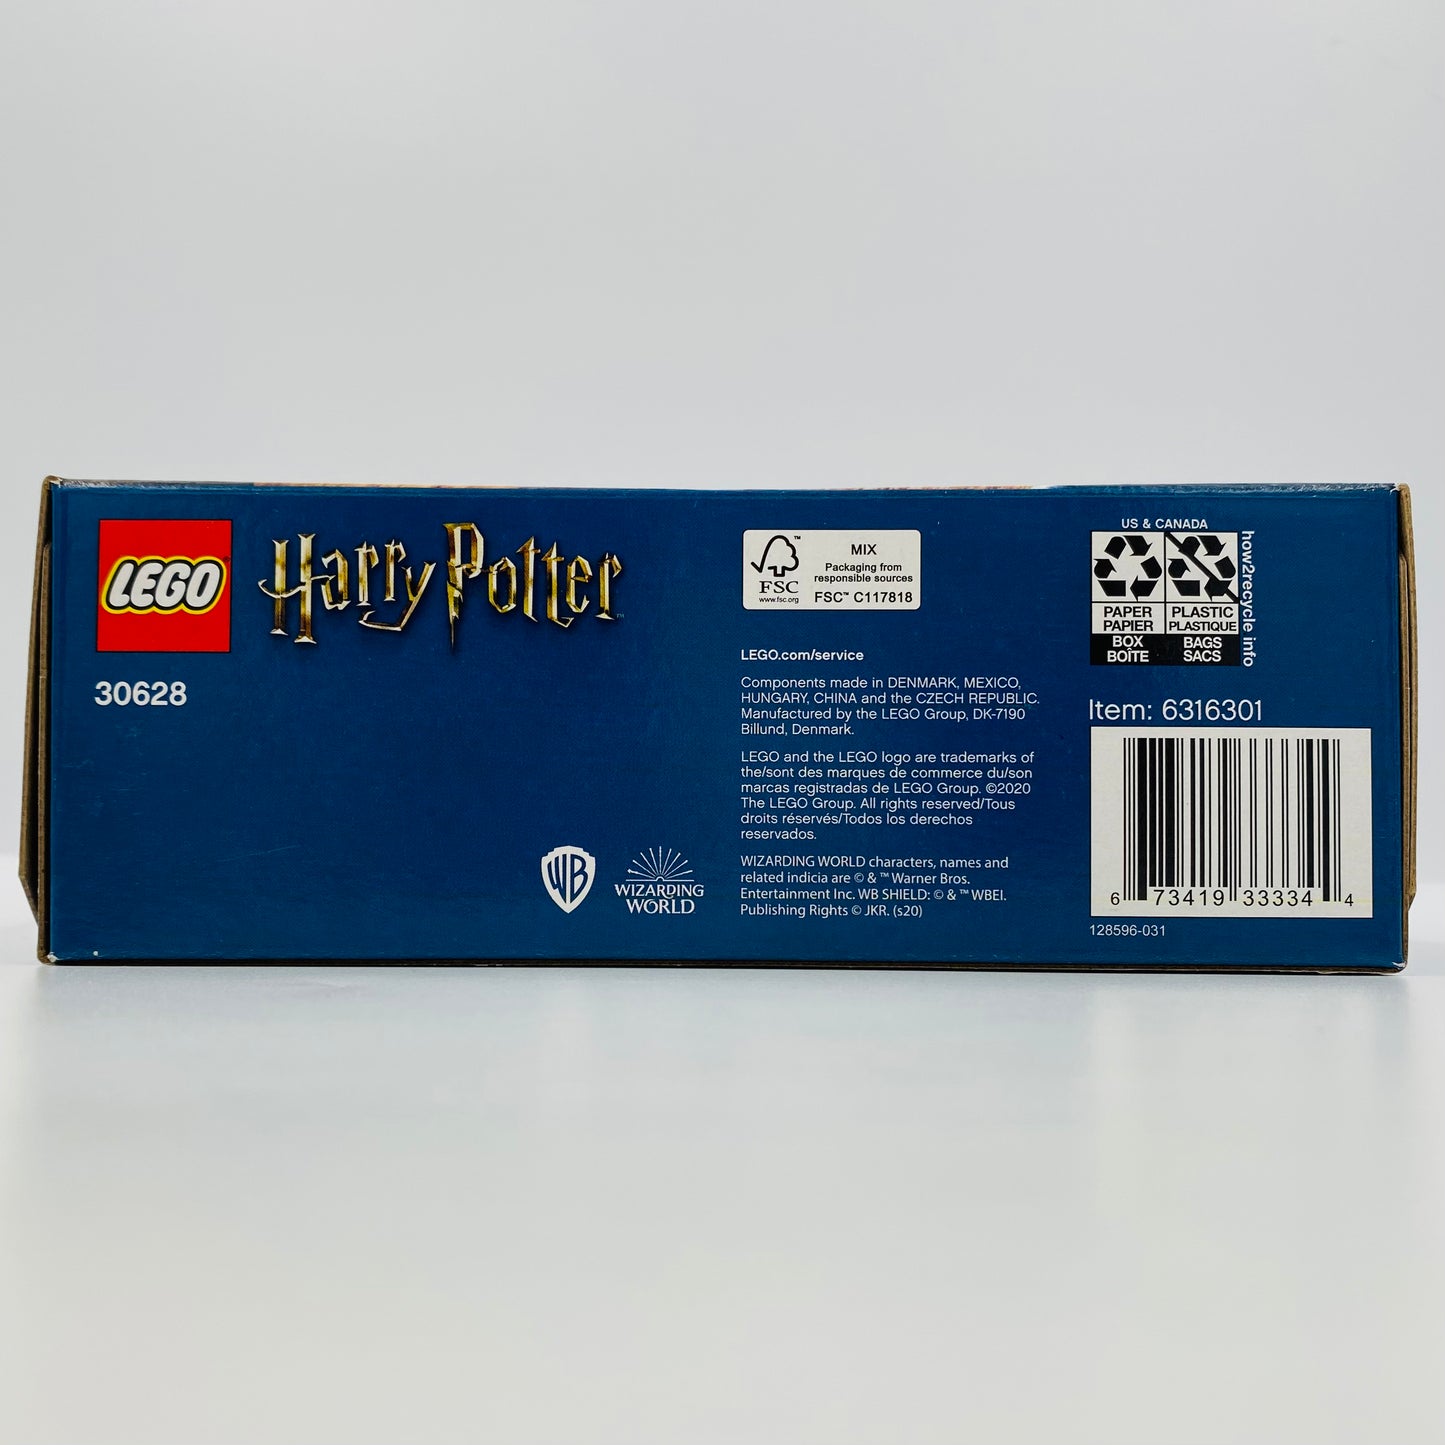 LEGO Harry Potter The Monster Book of Monsters boxed set (2020) 30628